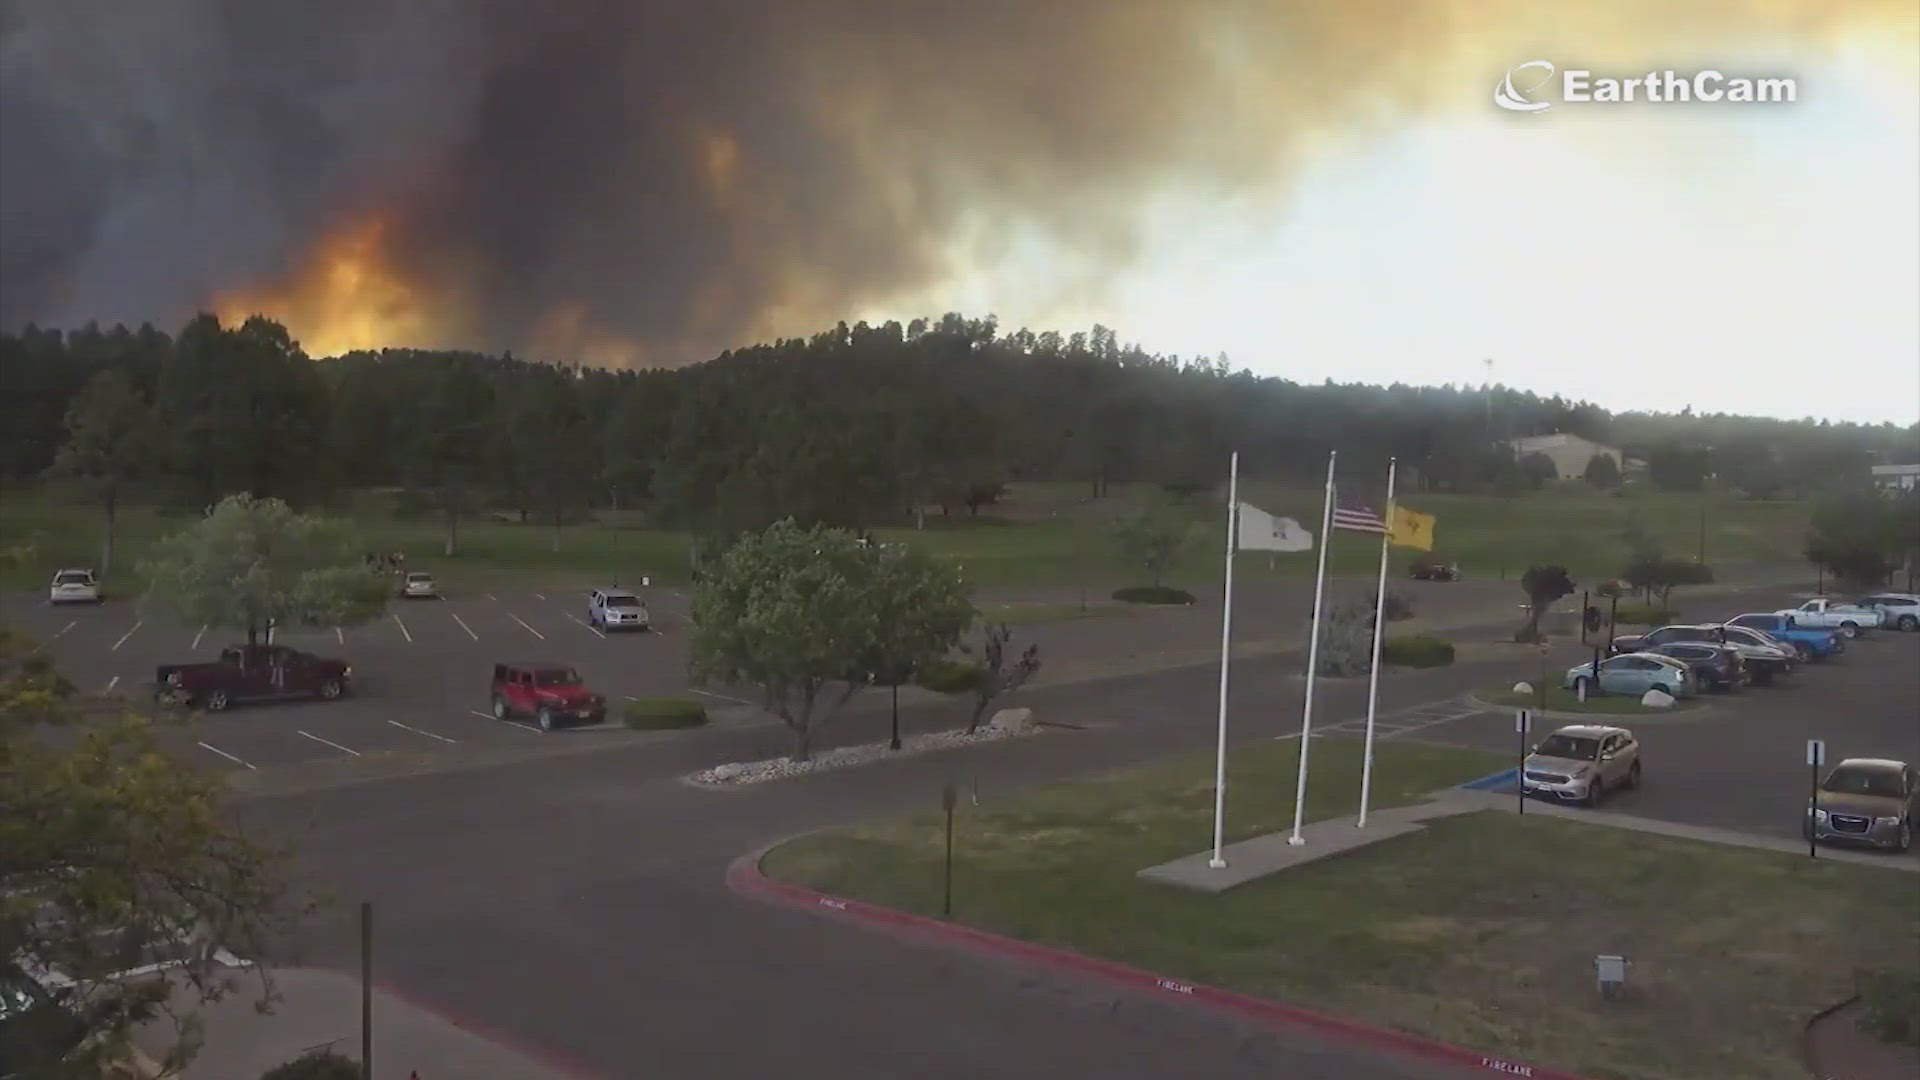 The Village of Ruidoso and a good portion of Lincoln County were under evacuation orders as the fires burned thousands of acres.